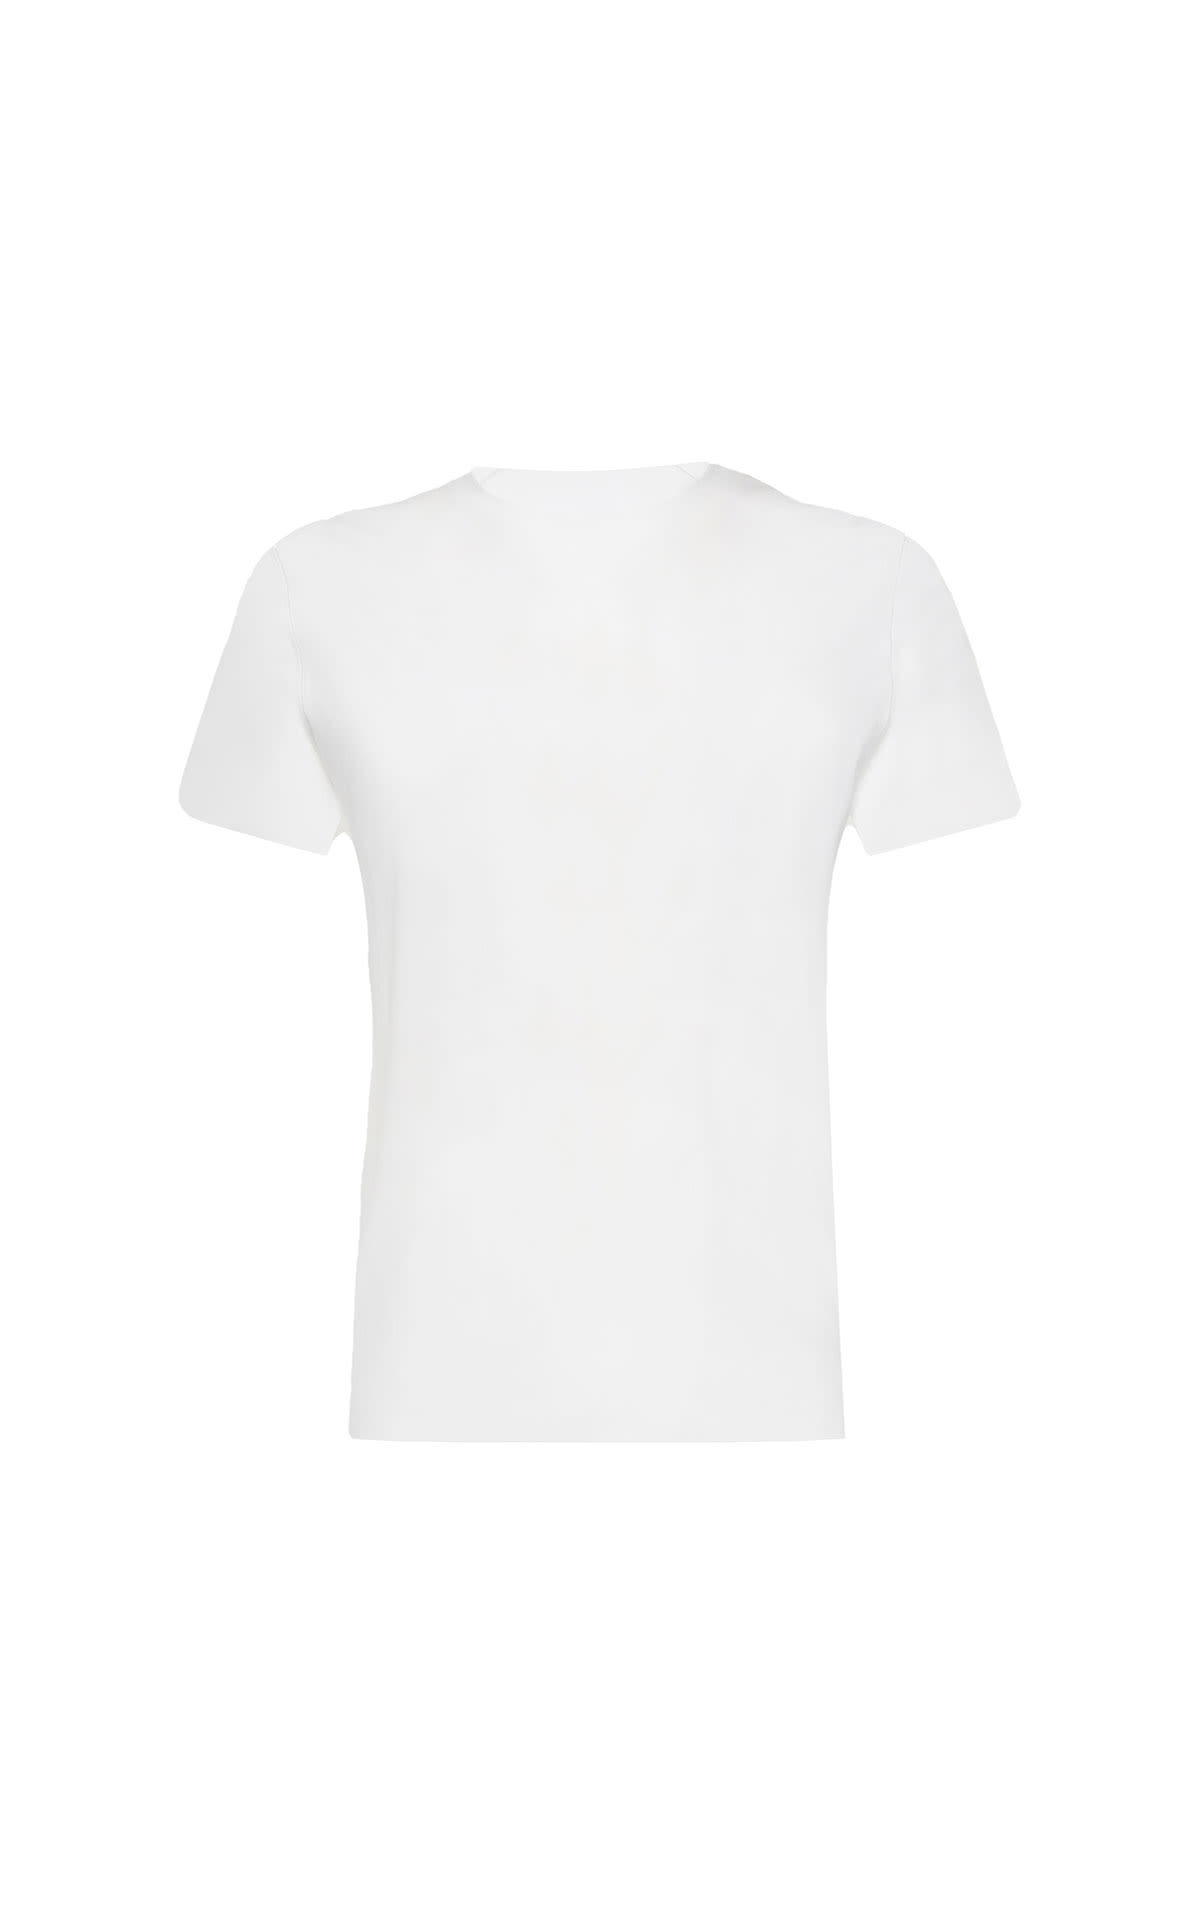 Wolford Men’s pure t-shirt from Bicester Village